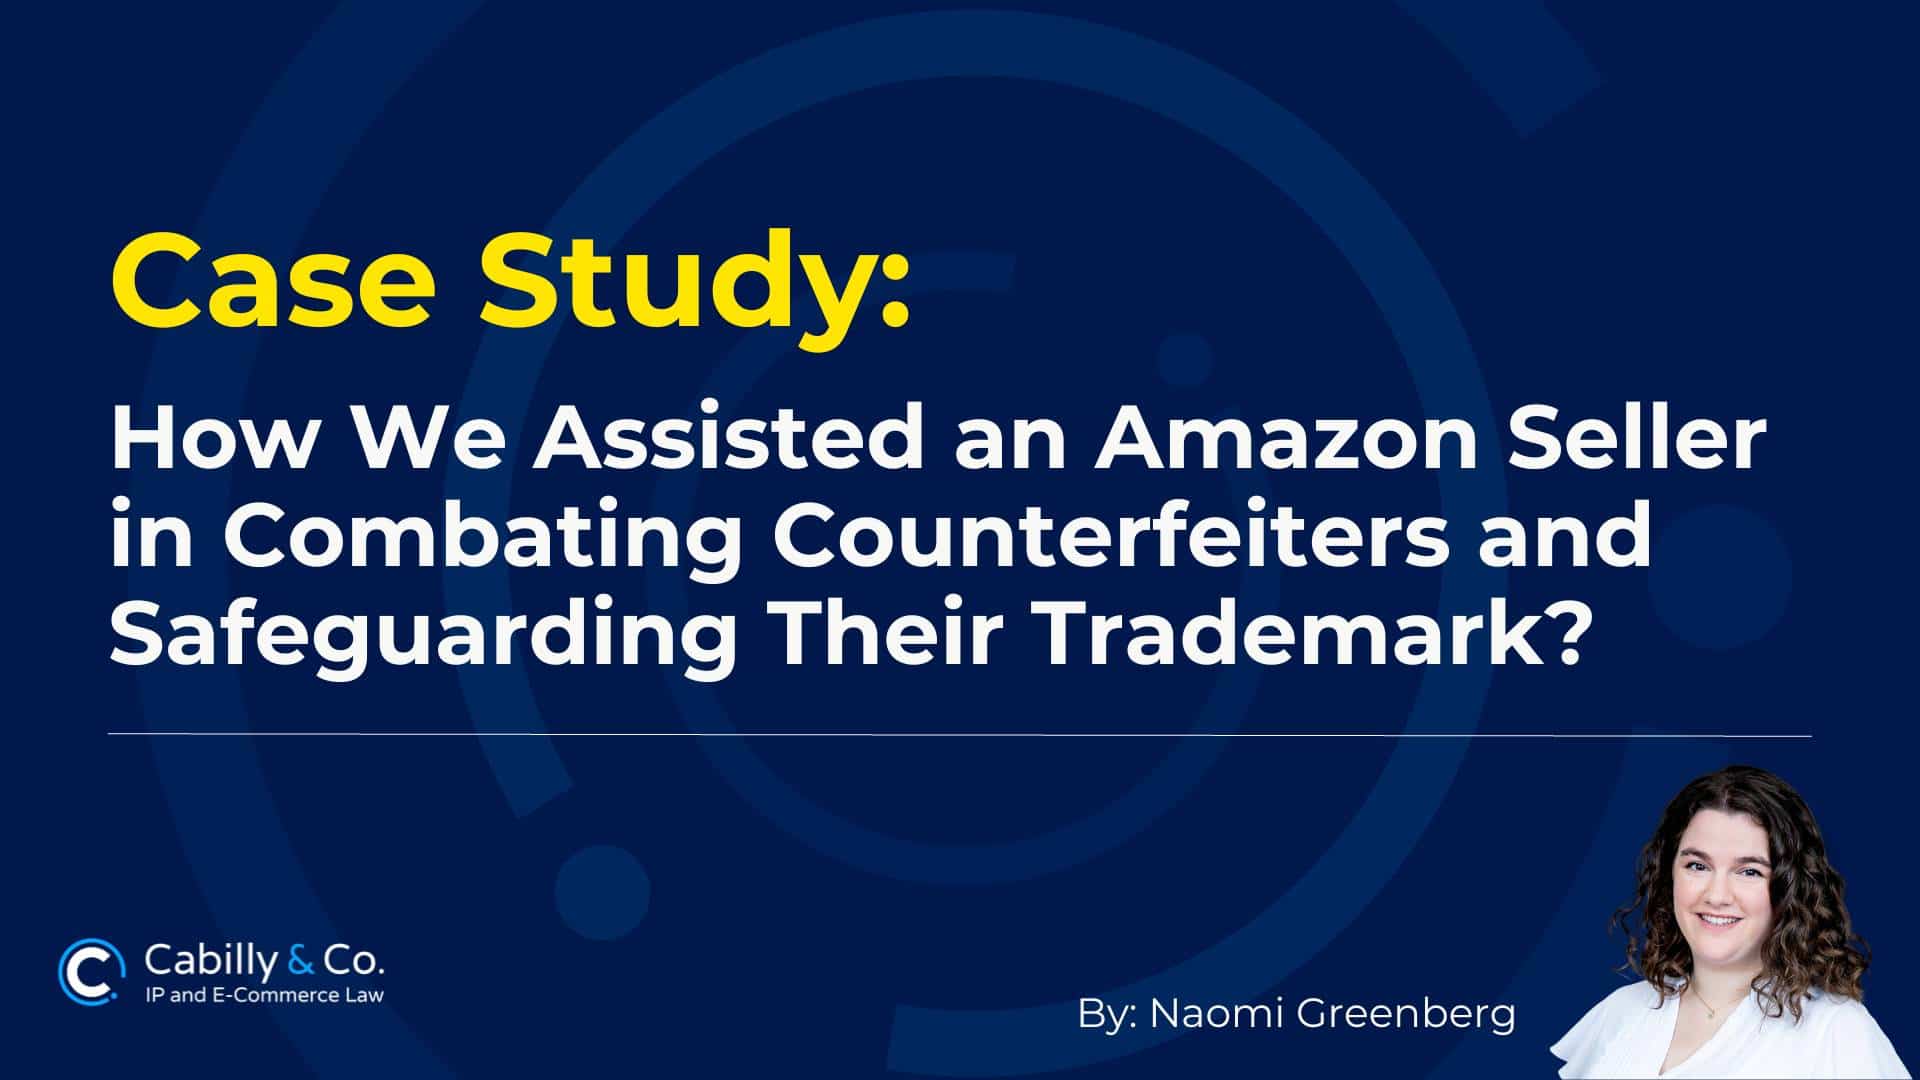 How We Assisted an Amazon Seller in Combating Counterfeiters and Safeguarding Their Trademark? Case Study: